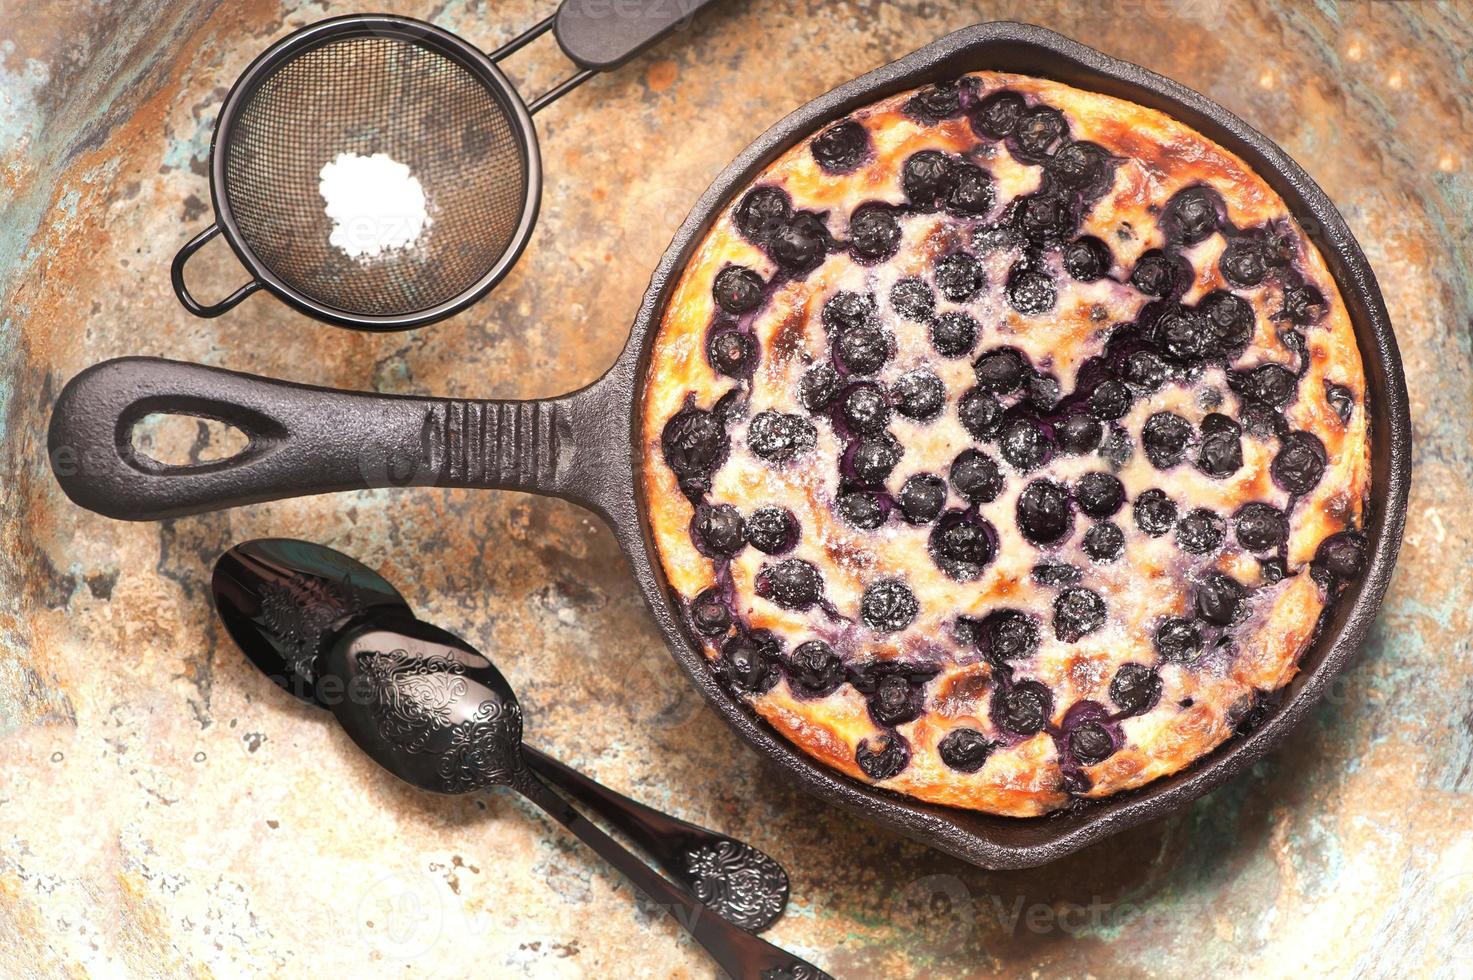 Cottage cheese casserole Cheesecake with blueberries. photo